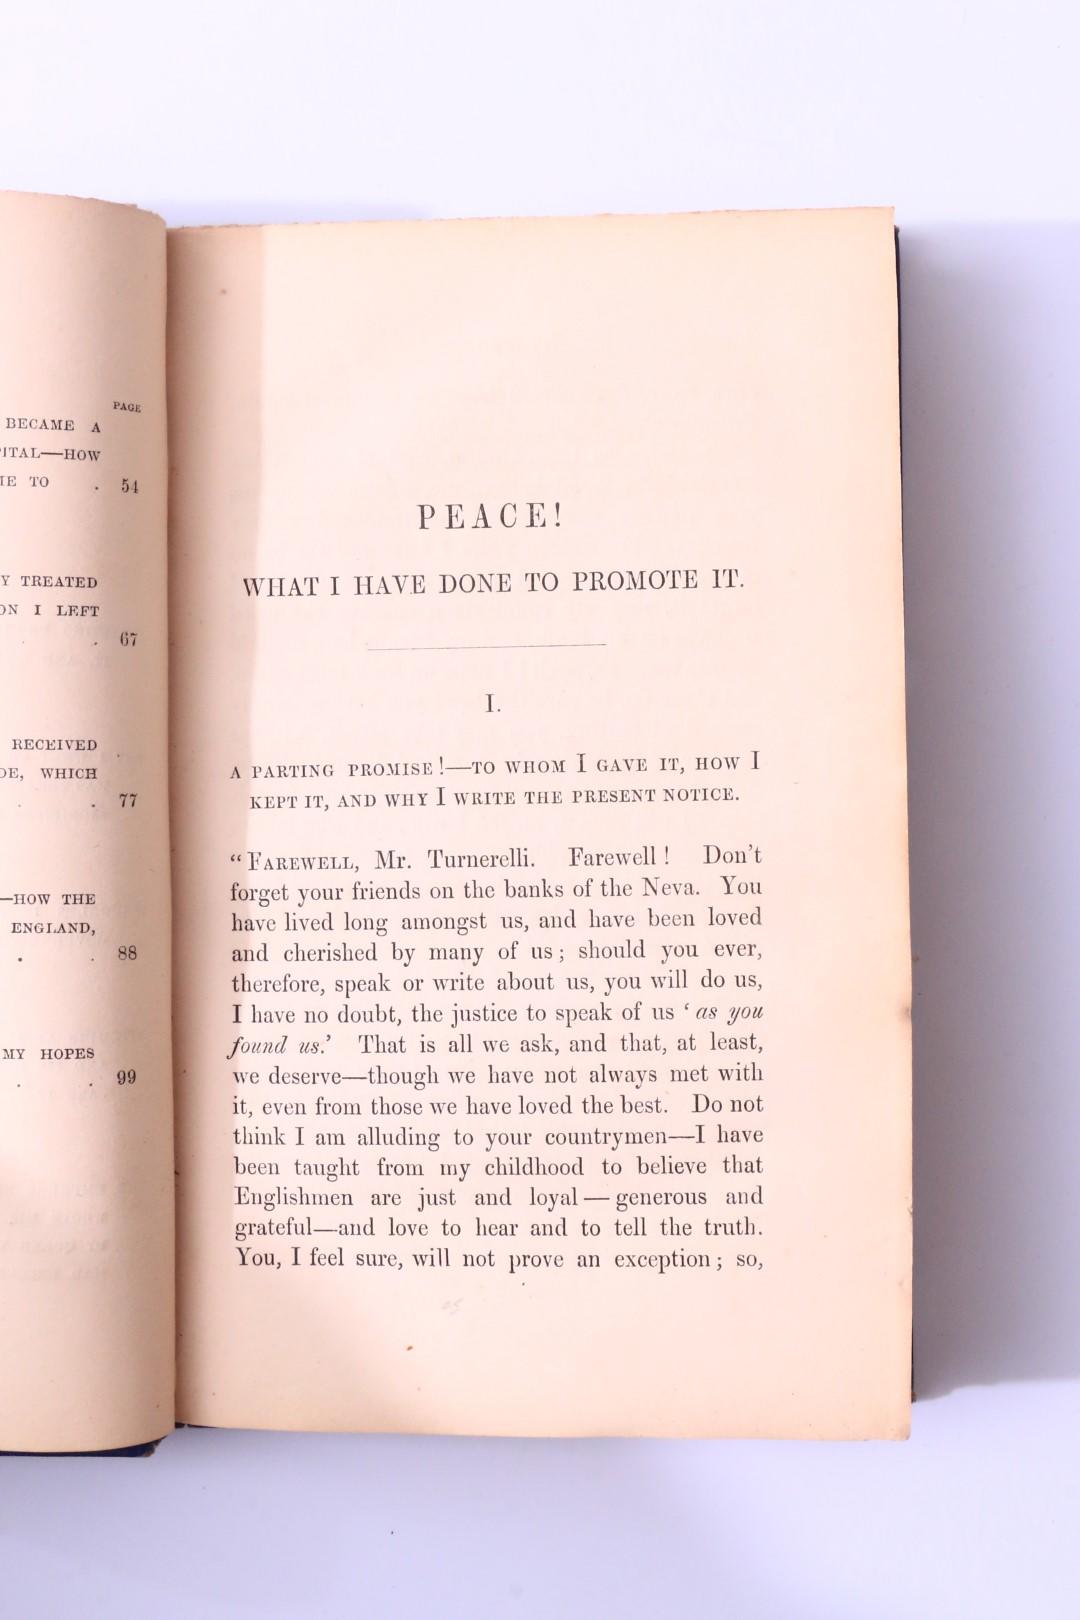 Anonymous [Edward Tracy Turnerelli?] - My Russian Promise - How I Kept it. Peace! What I did During the Late War to Promote It - L. Booth, 1856, First Edition.